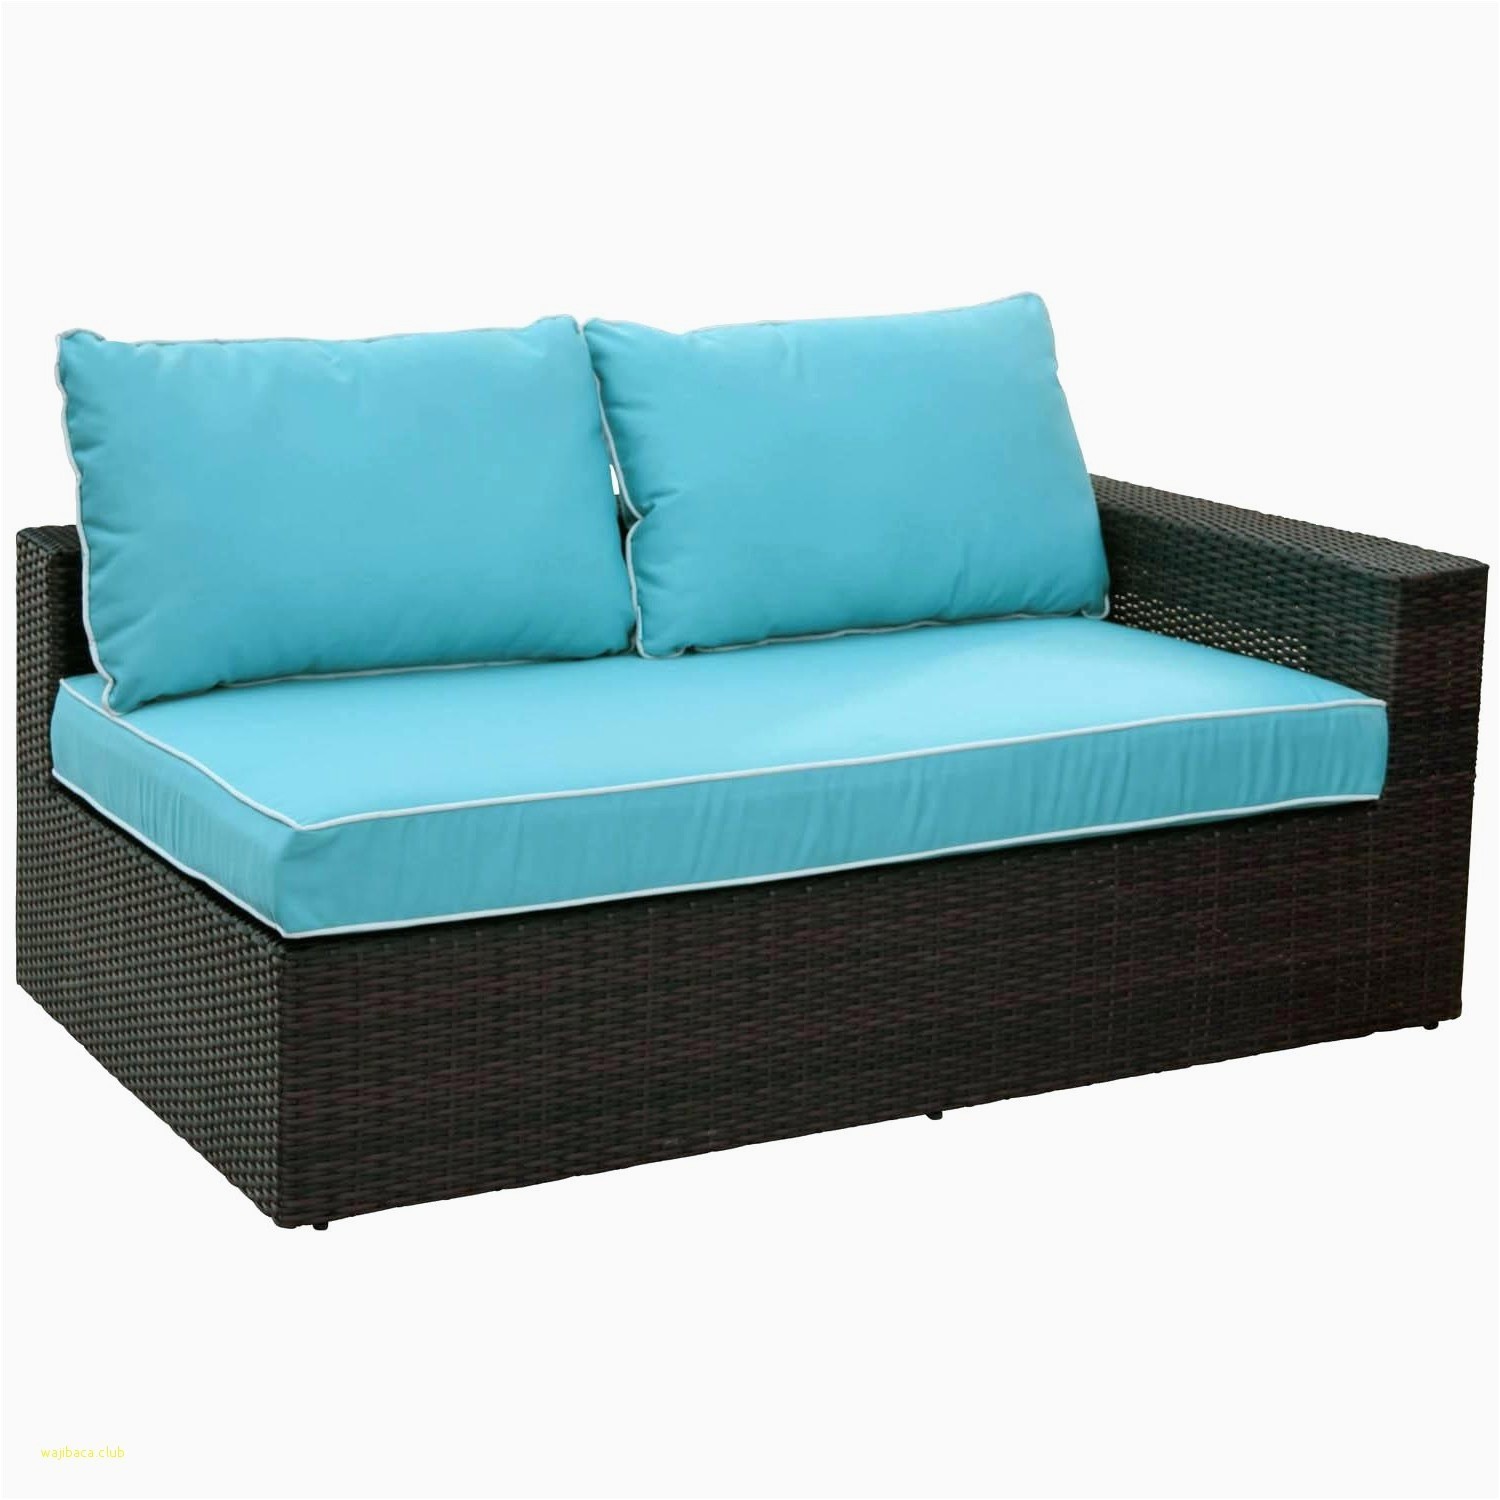 outdoor furniture free wicker outdoor sofa 0d patio chairs sale design of outside patio furniture sale